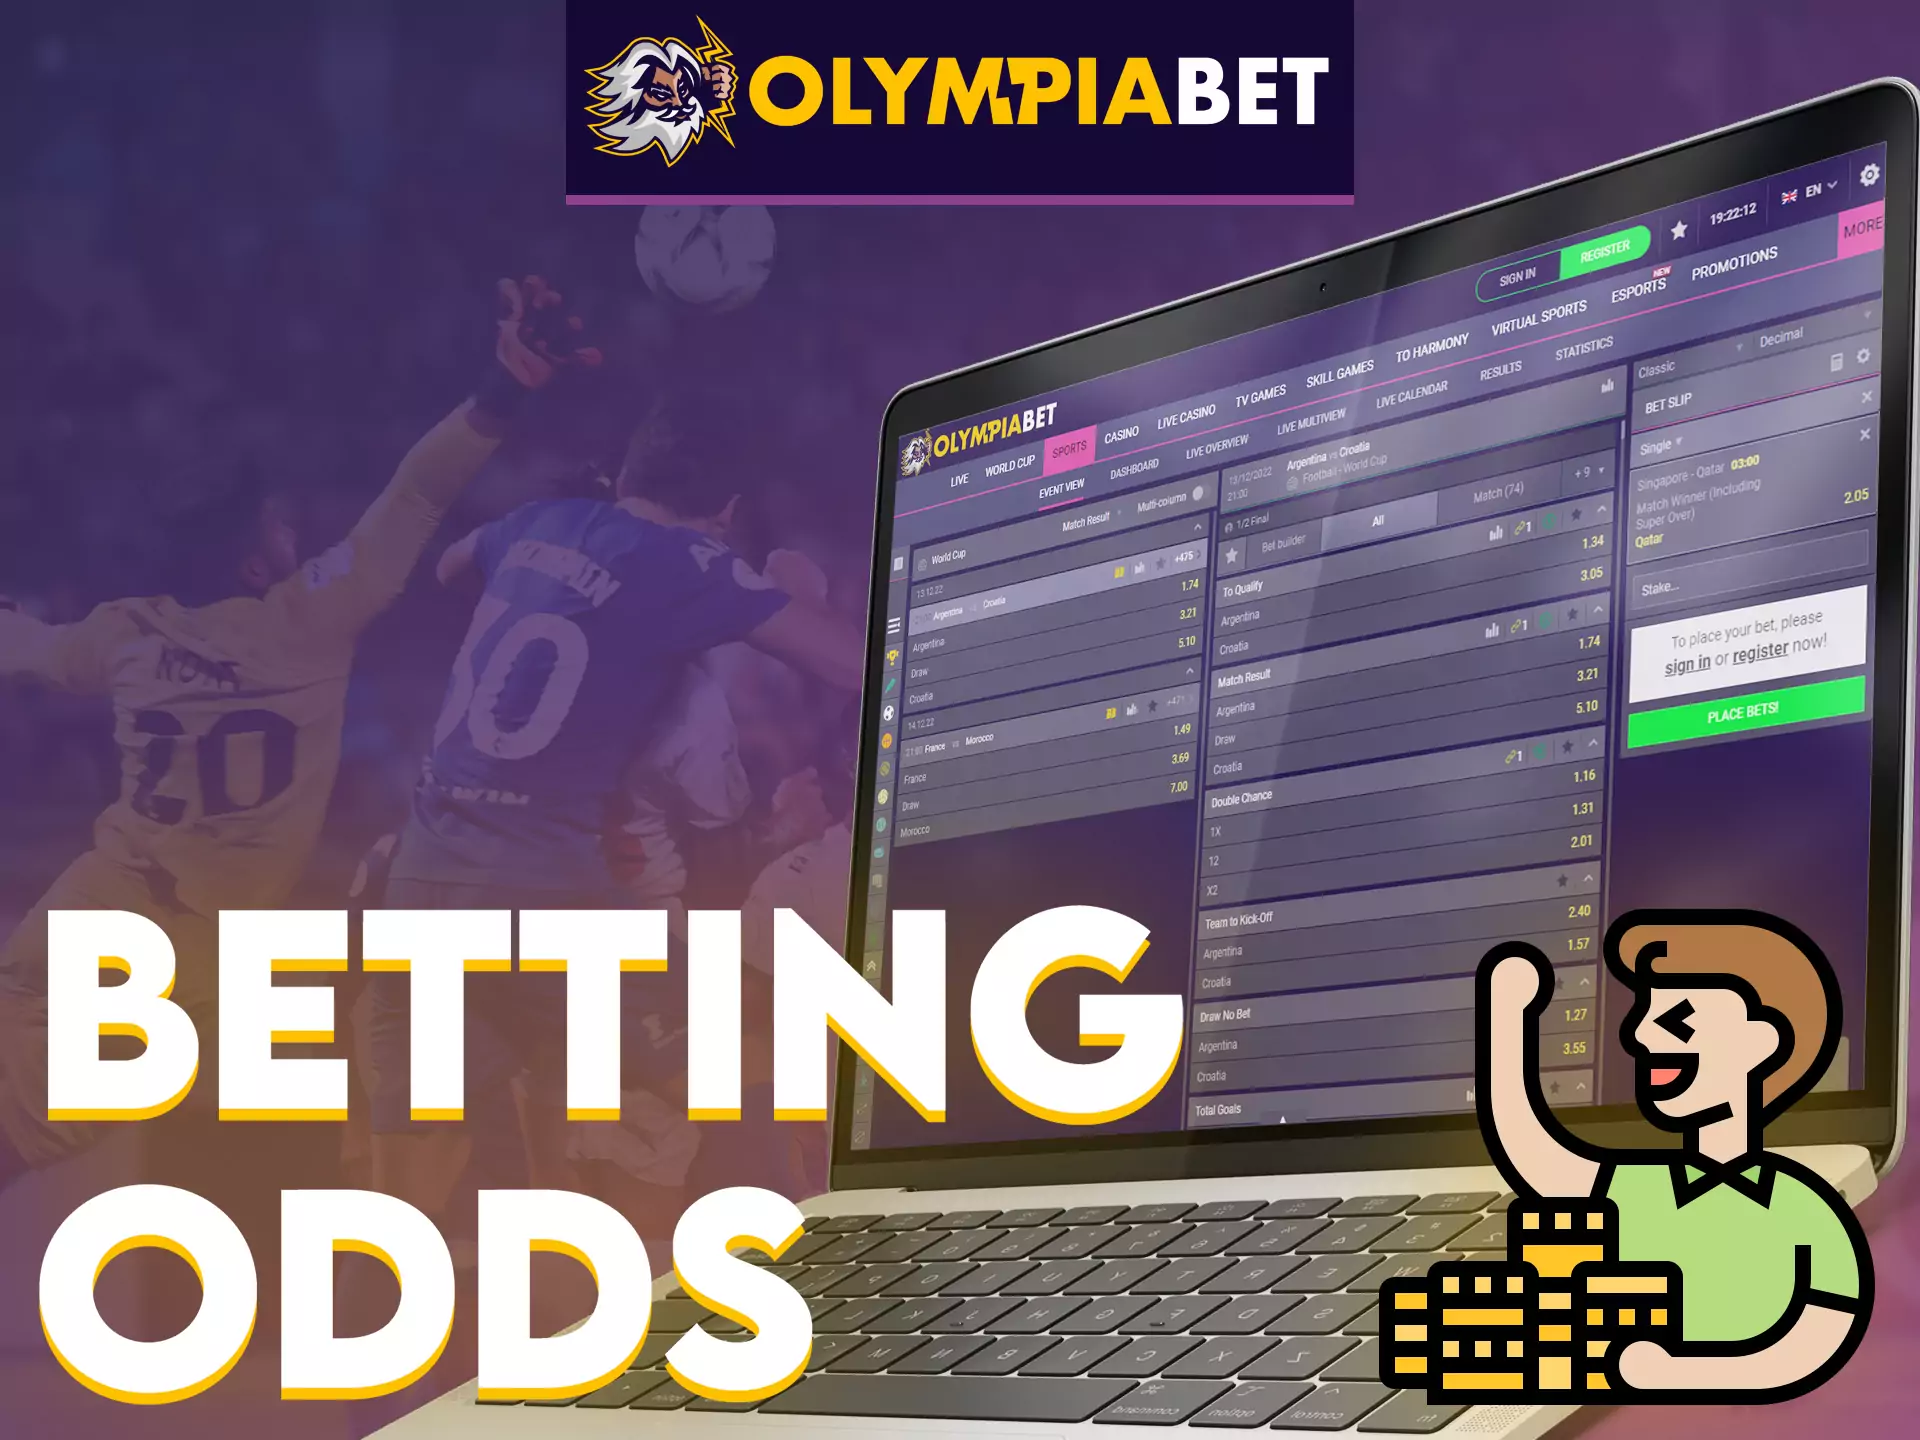 In OlympiaBet, there are special odds for players for any sporting events.